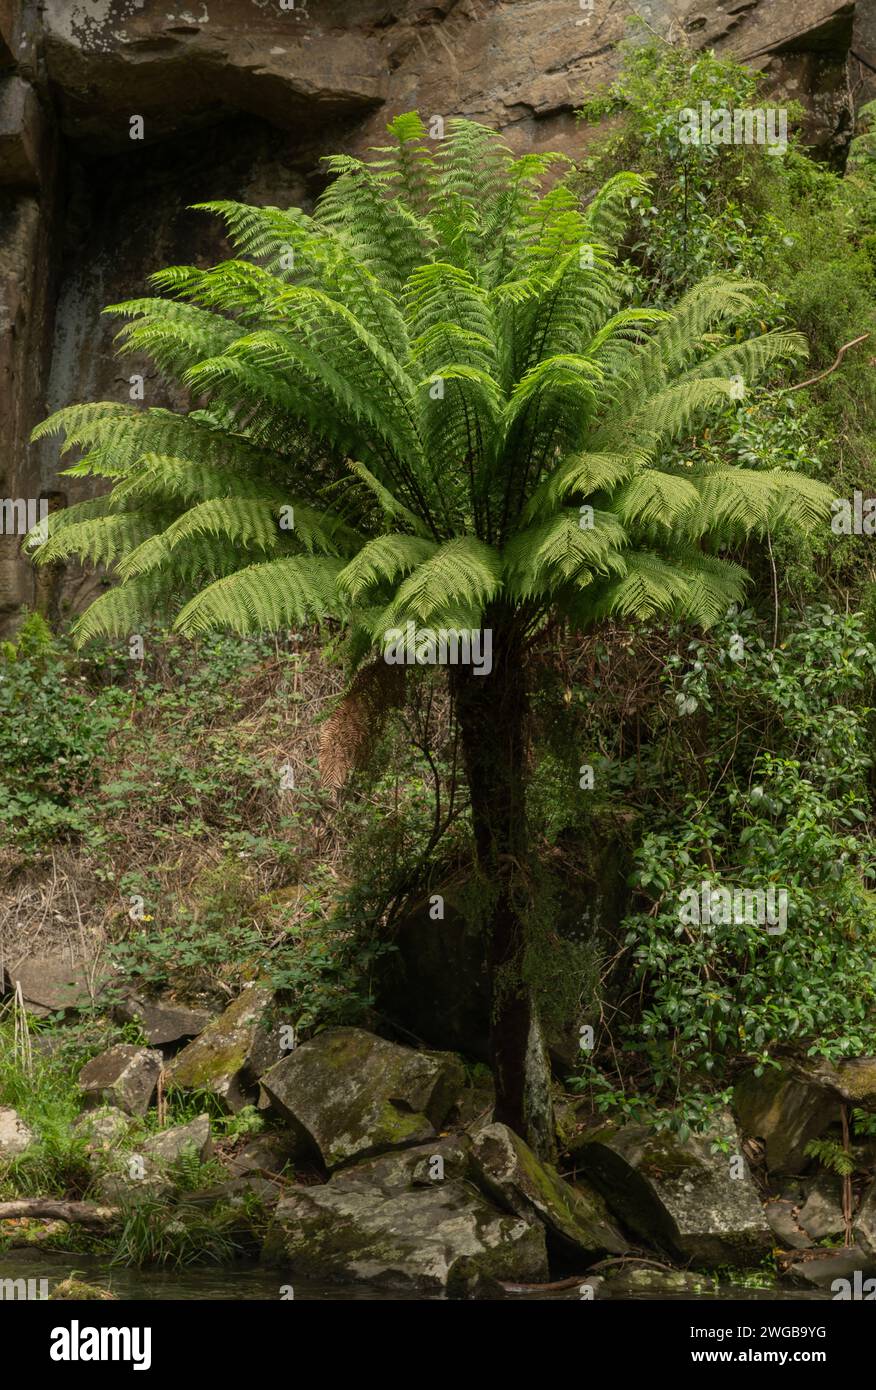 Soft tree fern, Dicksonia antarctica, at the base of the Phantom Falls, on the St George River, Great Otway National Park, Victoria, Australia. Stock Photo